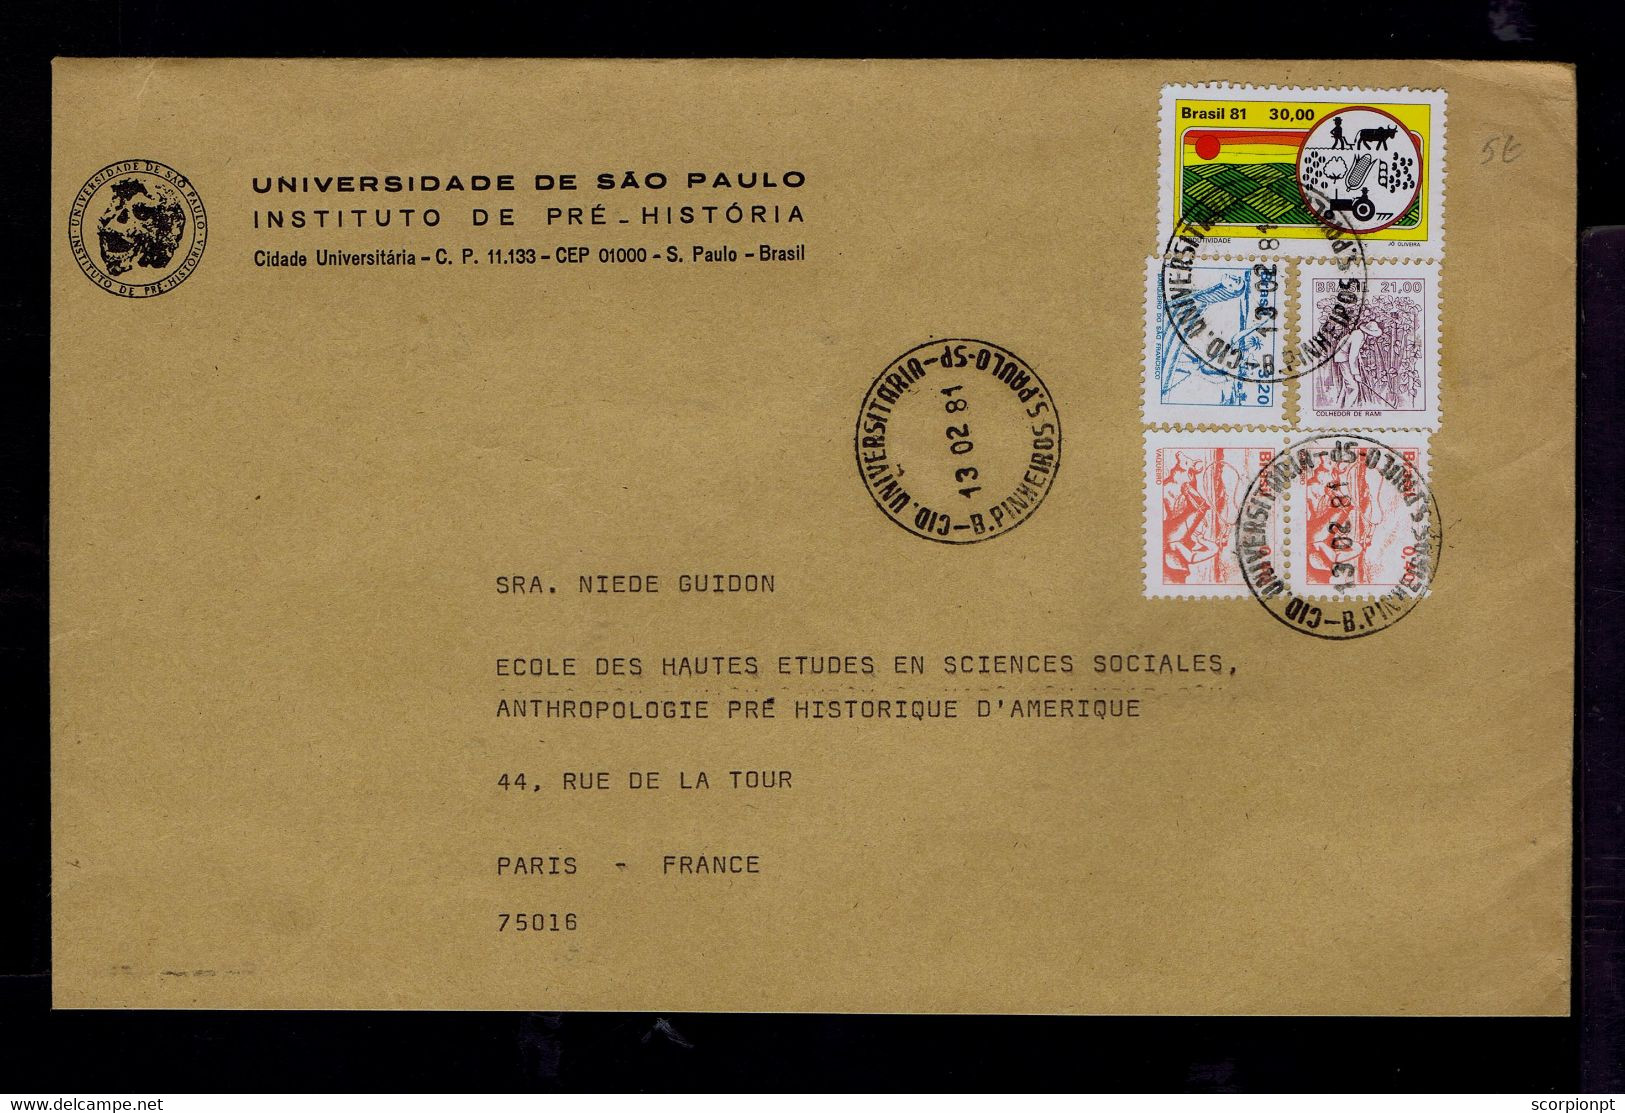 Sp9533 BRAZIL Agriculture Ox-plowing Wheat Food Animals "vaqueiro" Flora "barqueiro" Mailed - Agriculture